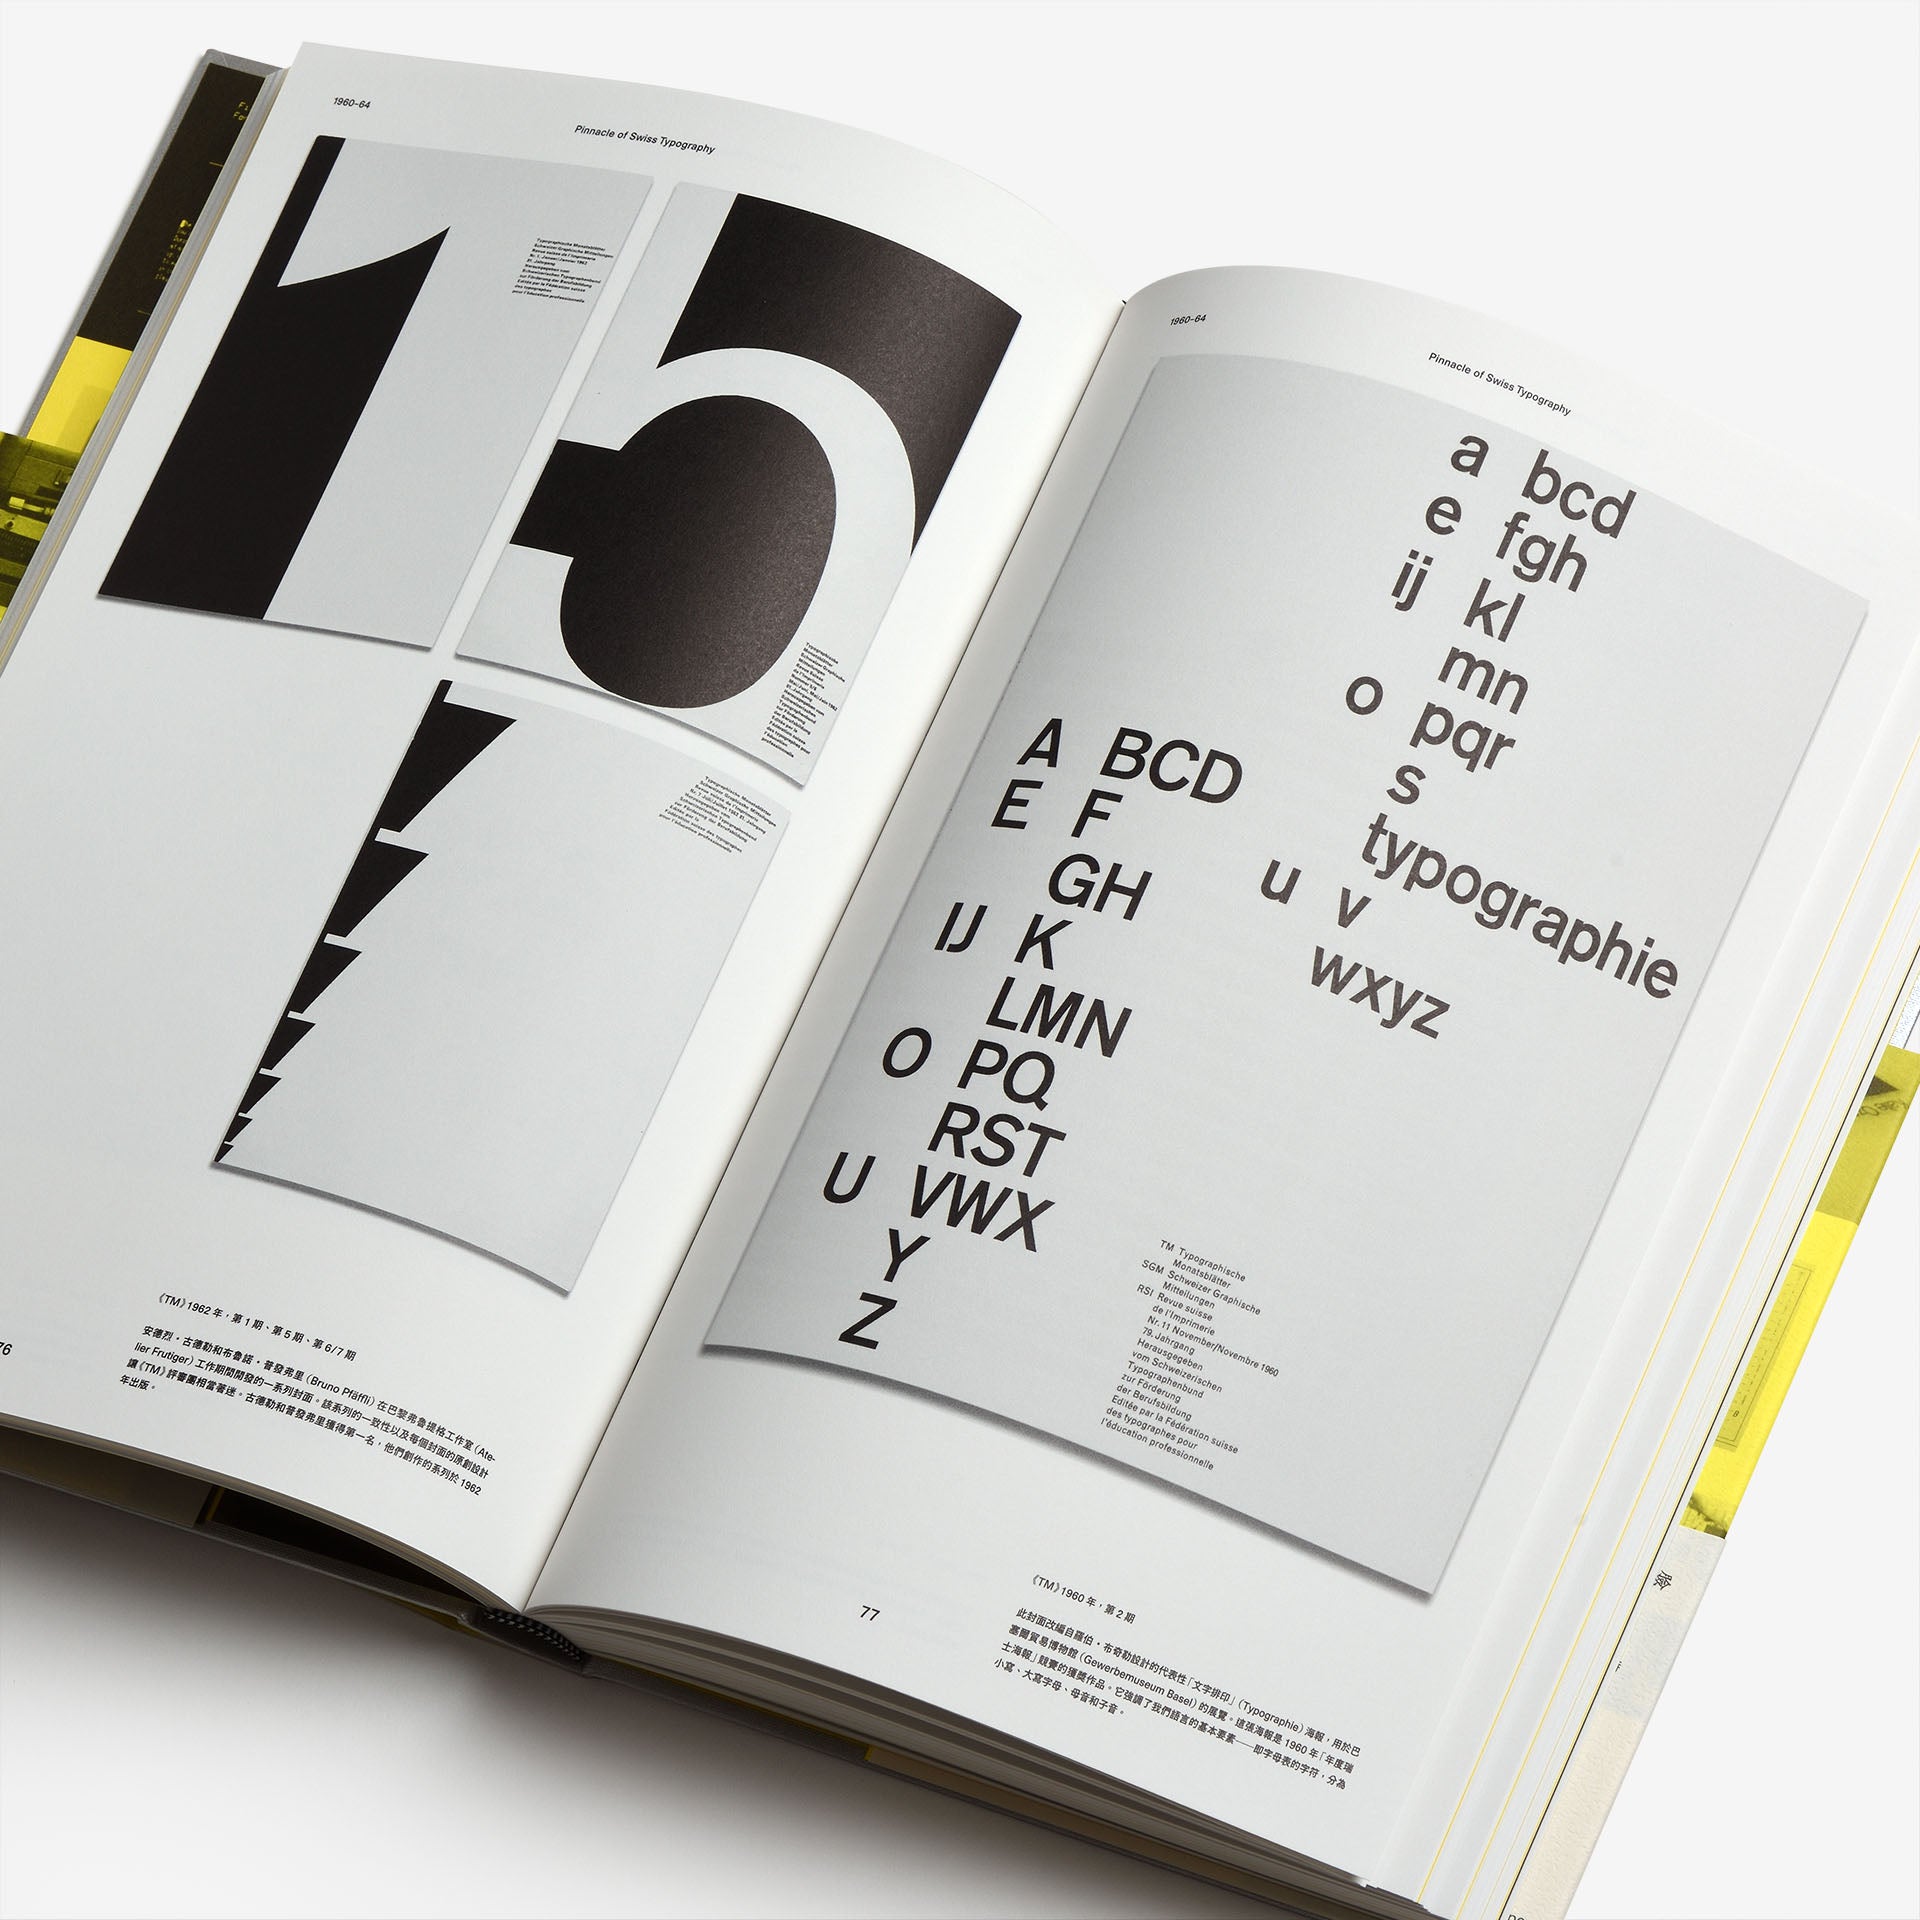 30 Years of Swiss Typographic Discourse in the Typografische Monatsblätter (Taiwanese Edition)